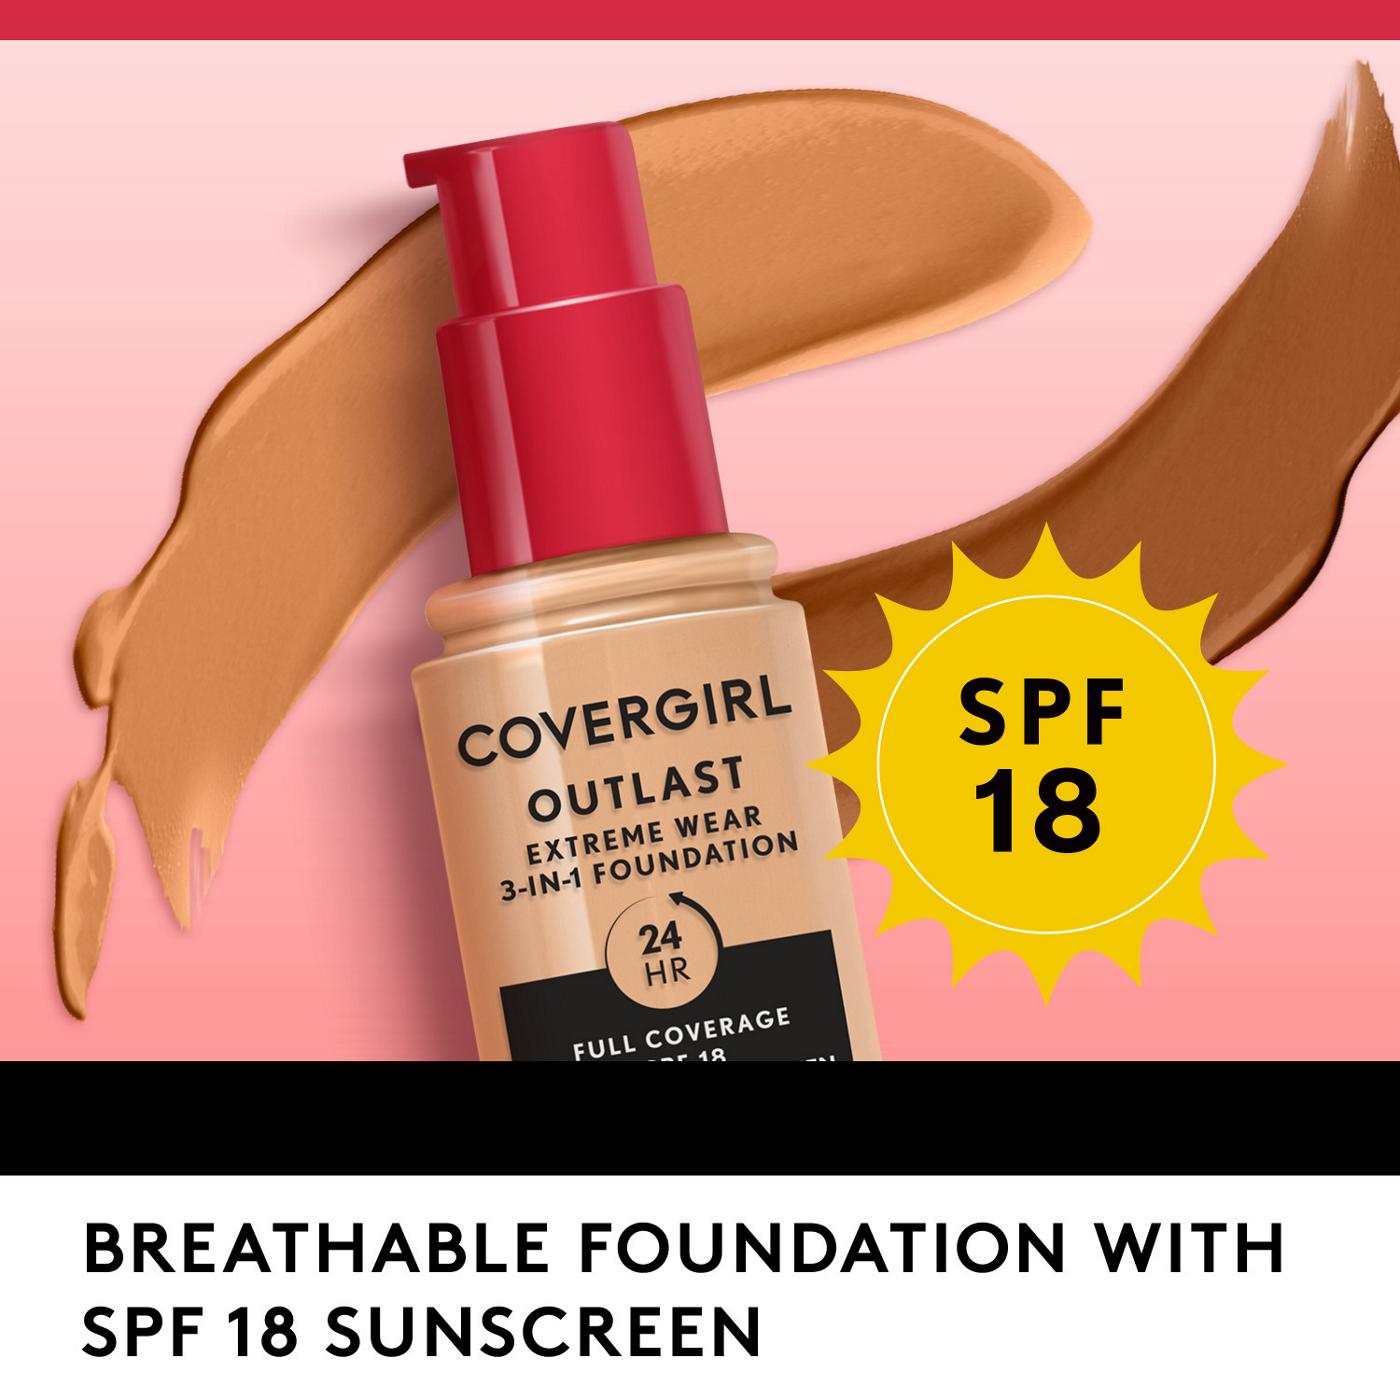 Covergirl Outlast Extreme Wear Liquid Foundation 870 Toasted Almond; image 8 of 11